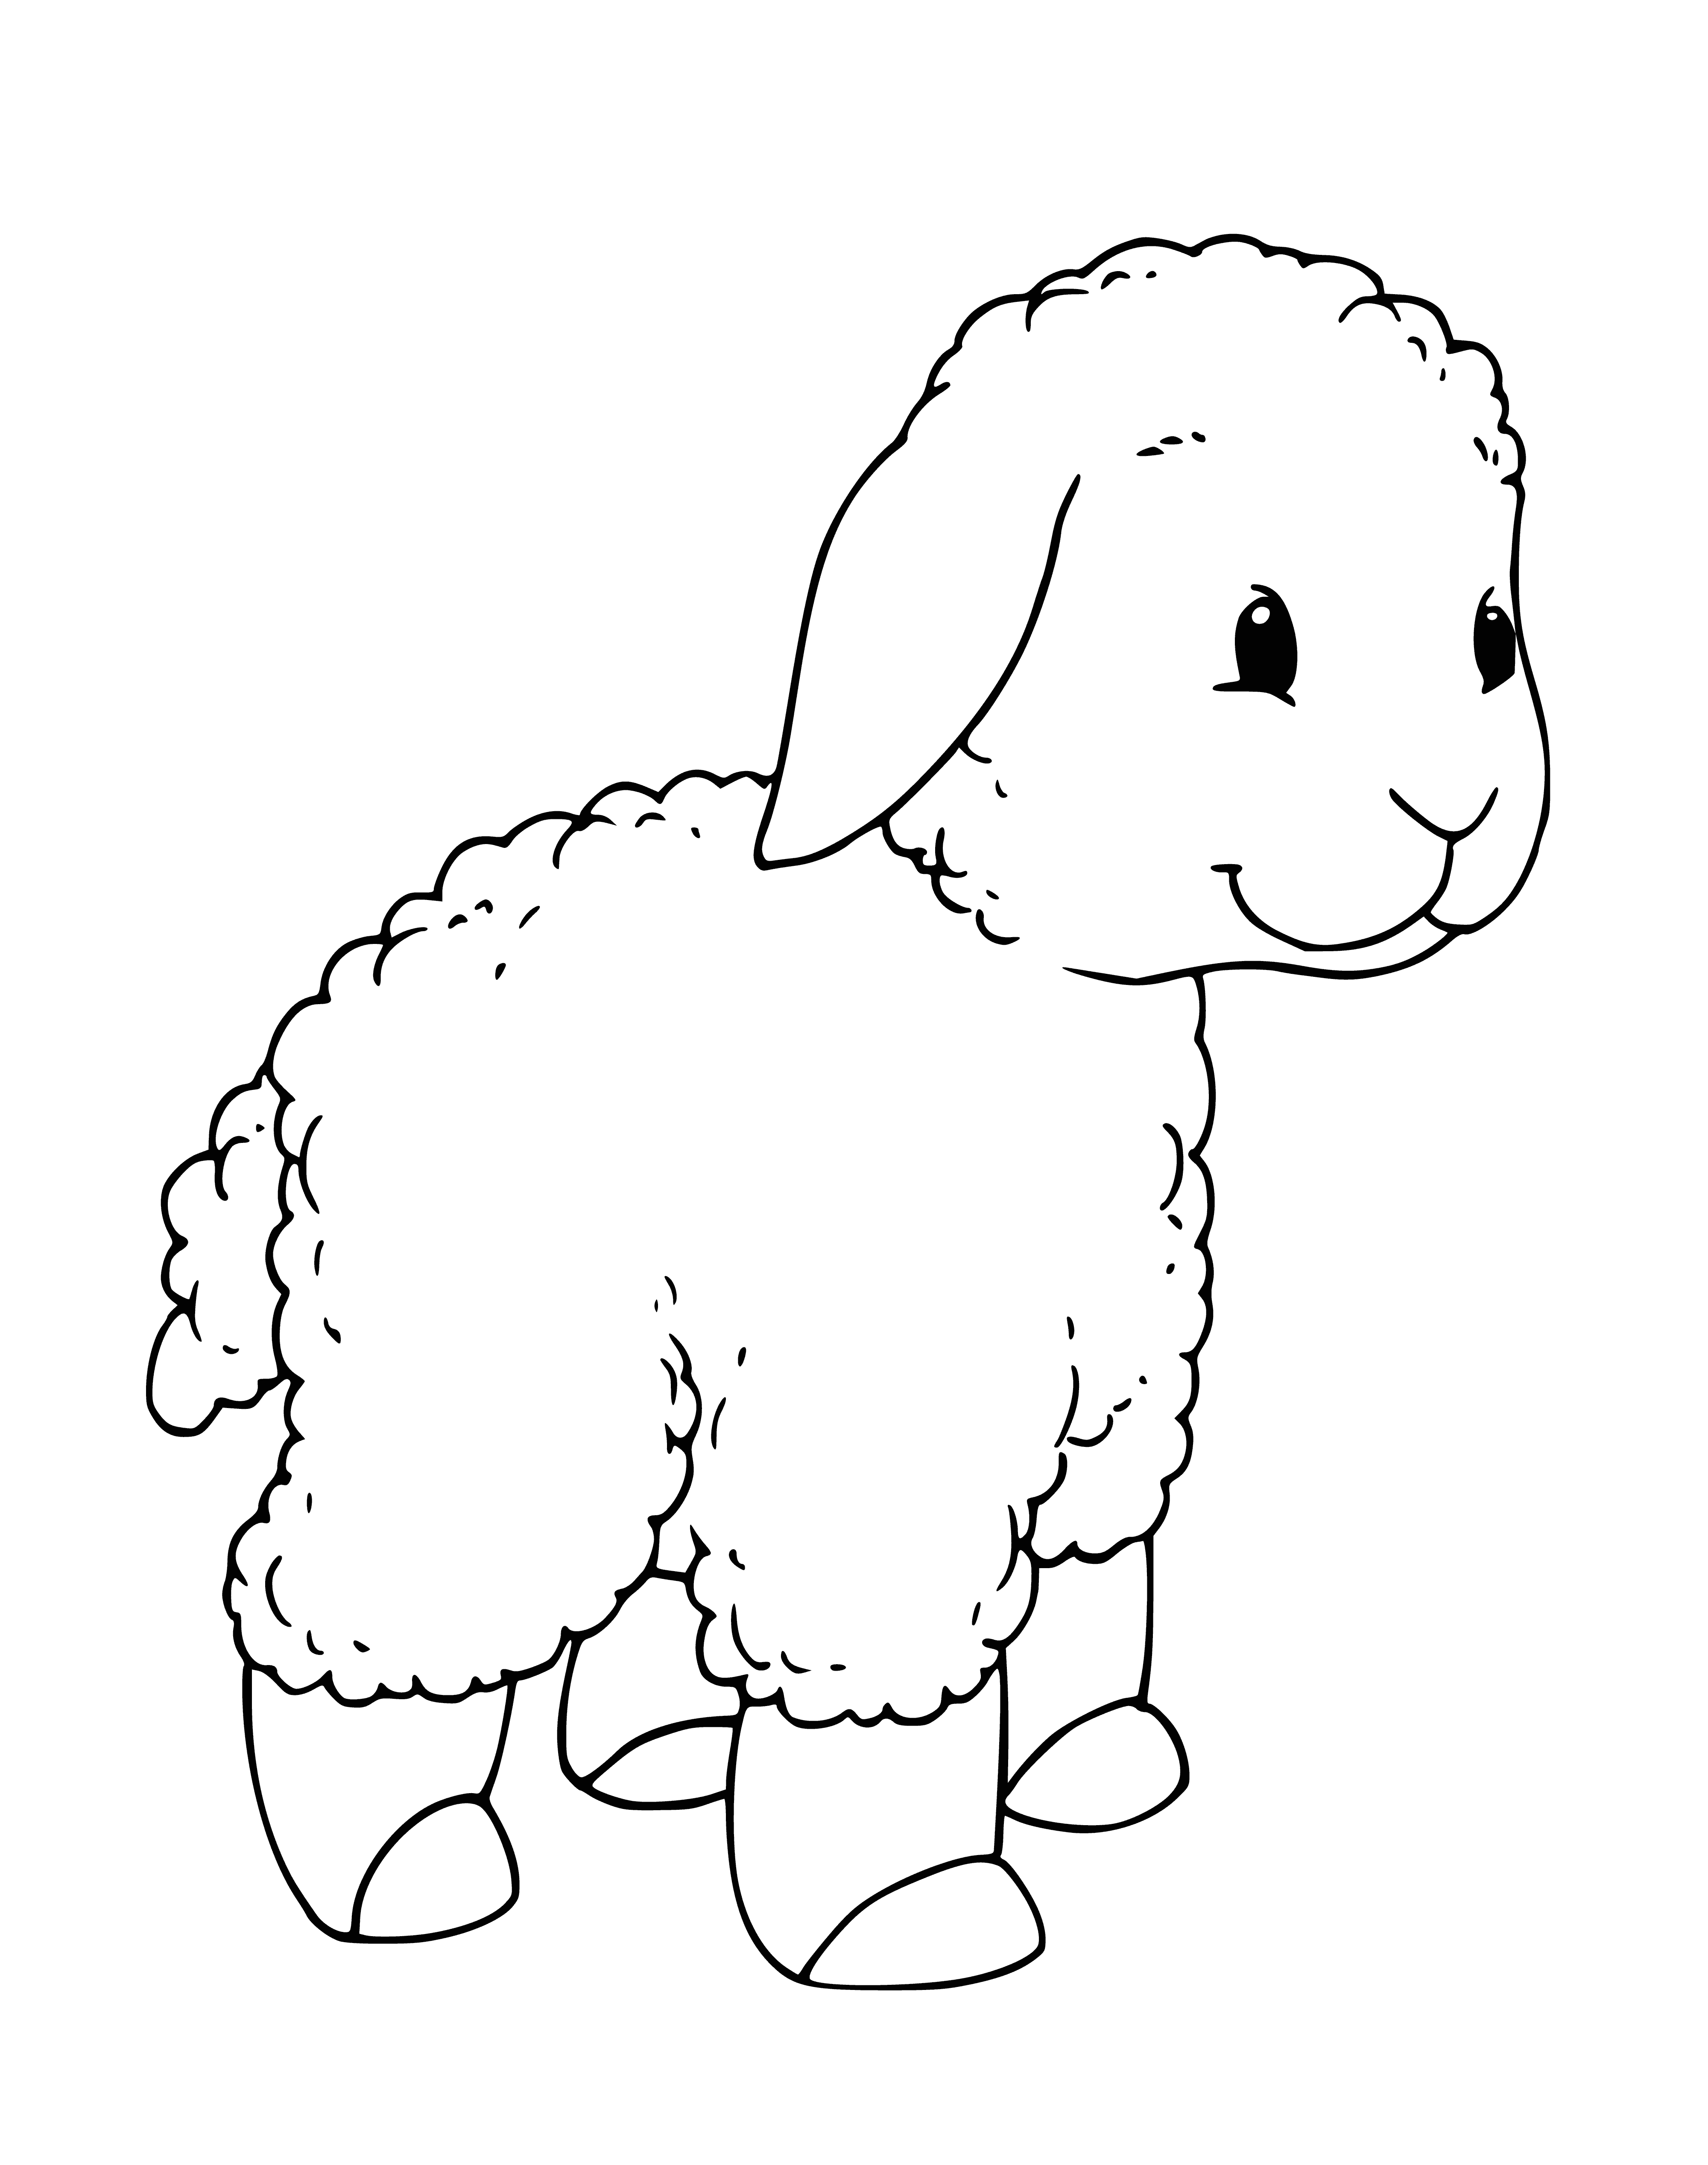 coloring page: Mother sheep and her lamb grazing happily, the sweet lamb looking up at its mama with big black eyes and fluffy white fur.